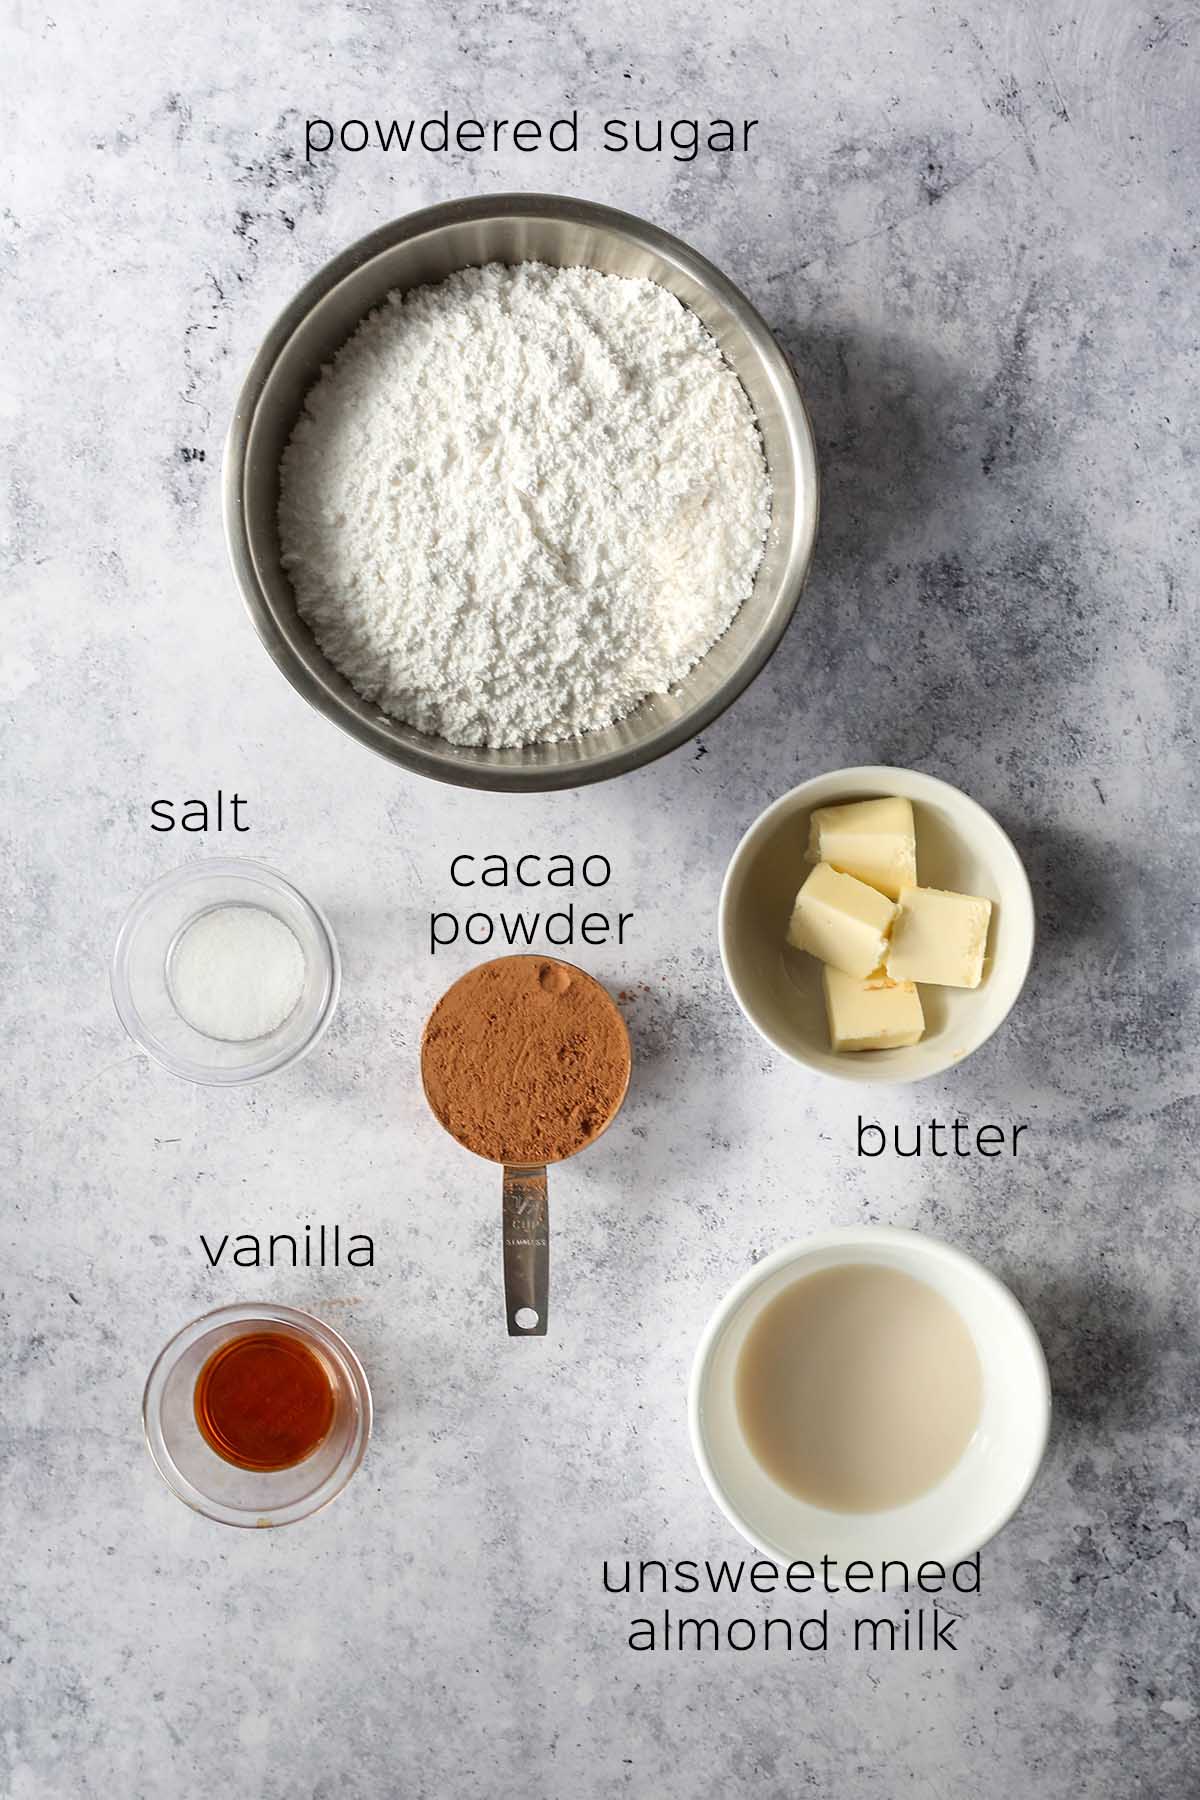 ingredients to make the vegan chocolate buttercream frosting for the gluten free cupcakes